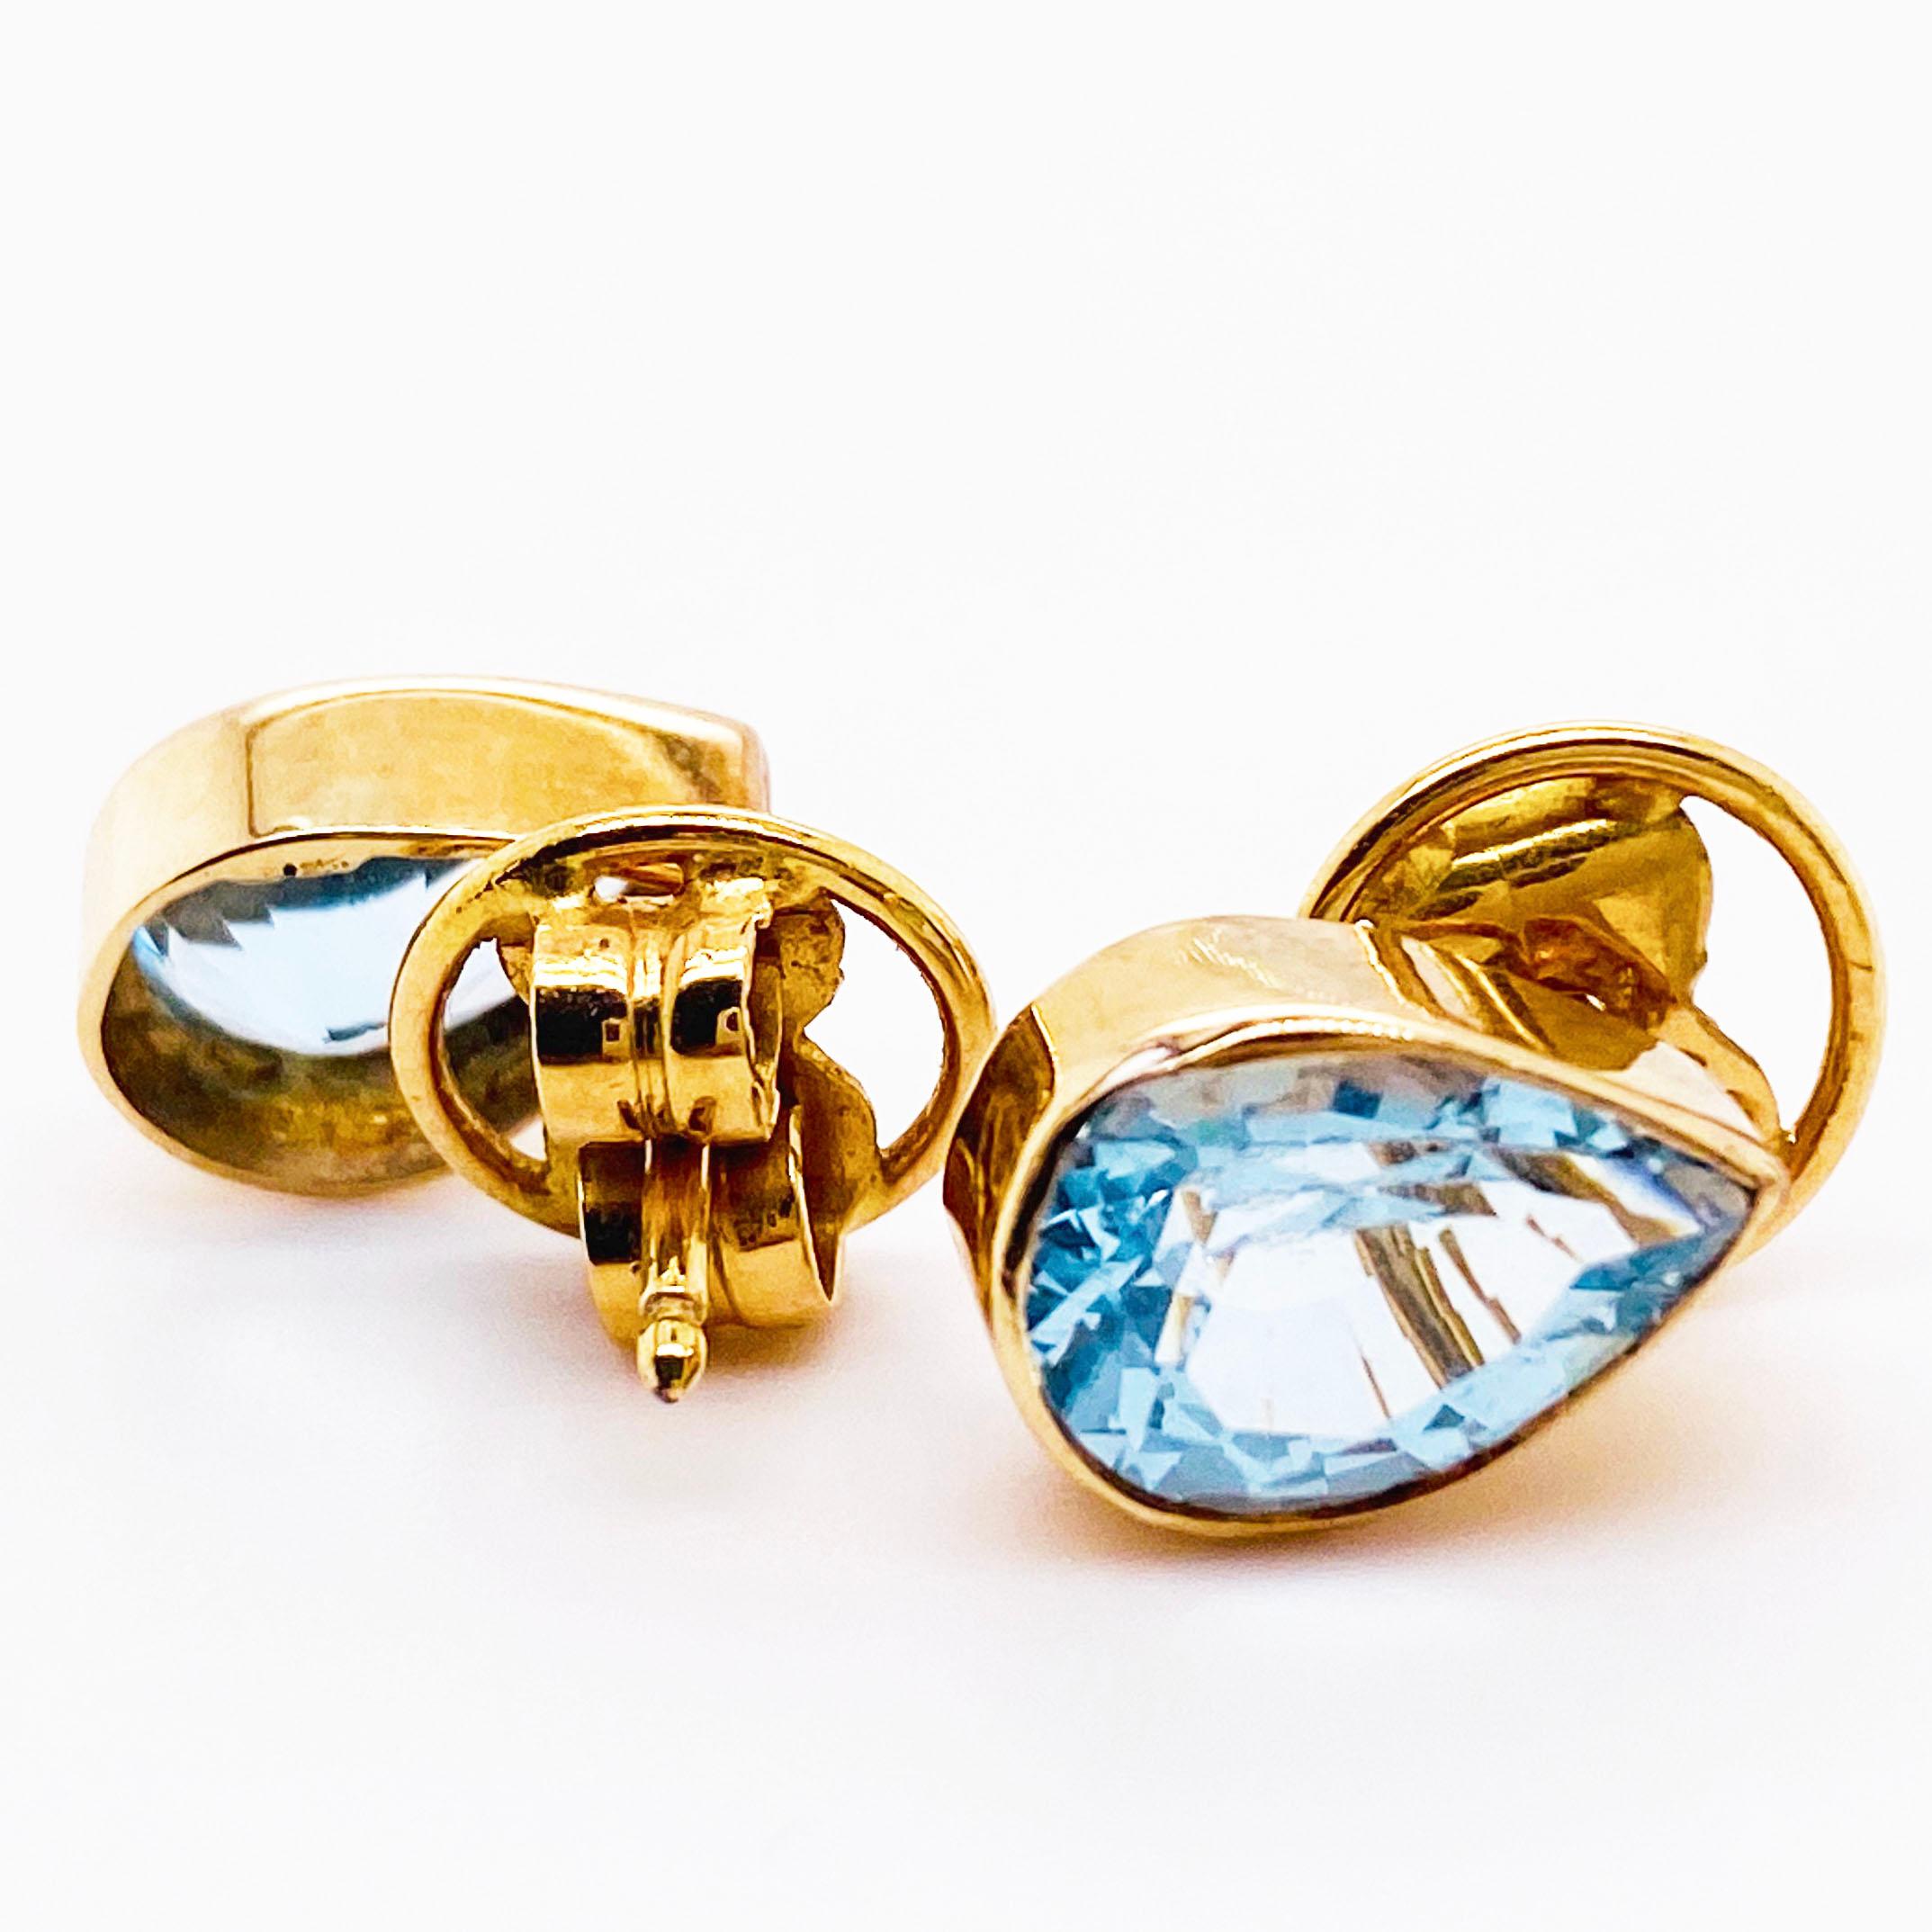 These Original Pear Blue Topaz Yellow Gold Stud Earrings Were Hand Fabricated In Solid 14 Karat Bezels and weigh over 5 carats. The earrings were gently created in our shop using the gemstones, 14 karat gold sheet, and earring posts and extra large